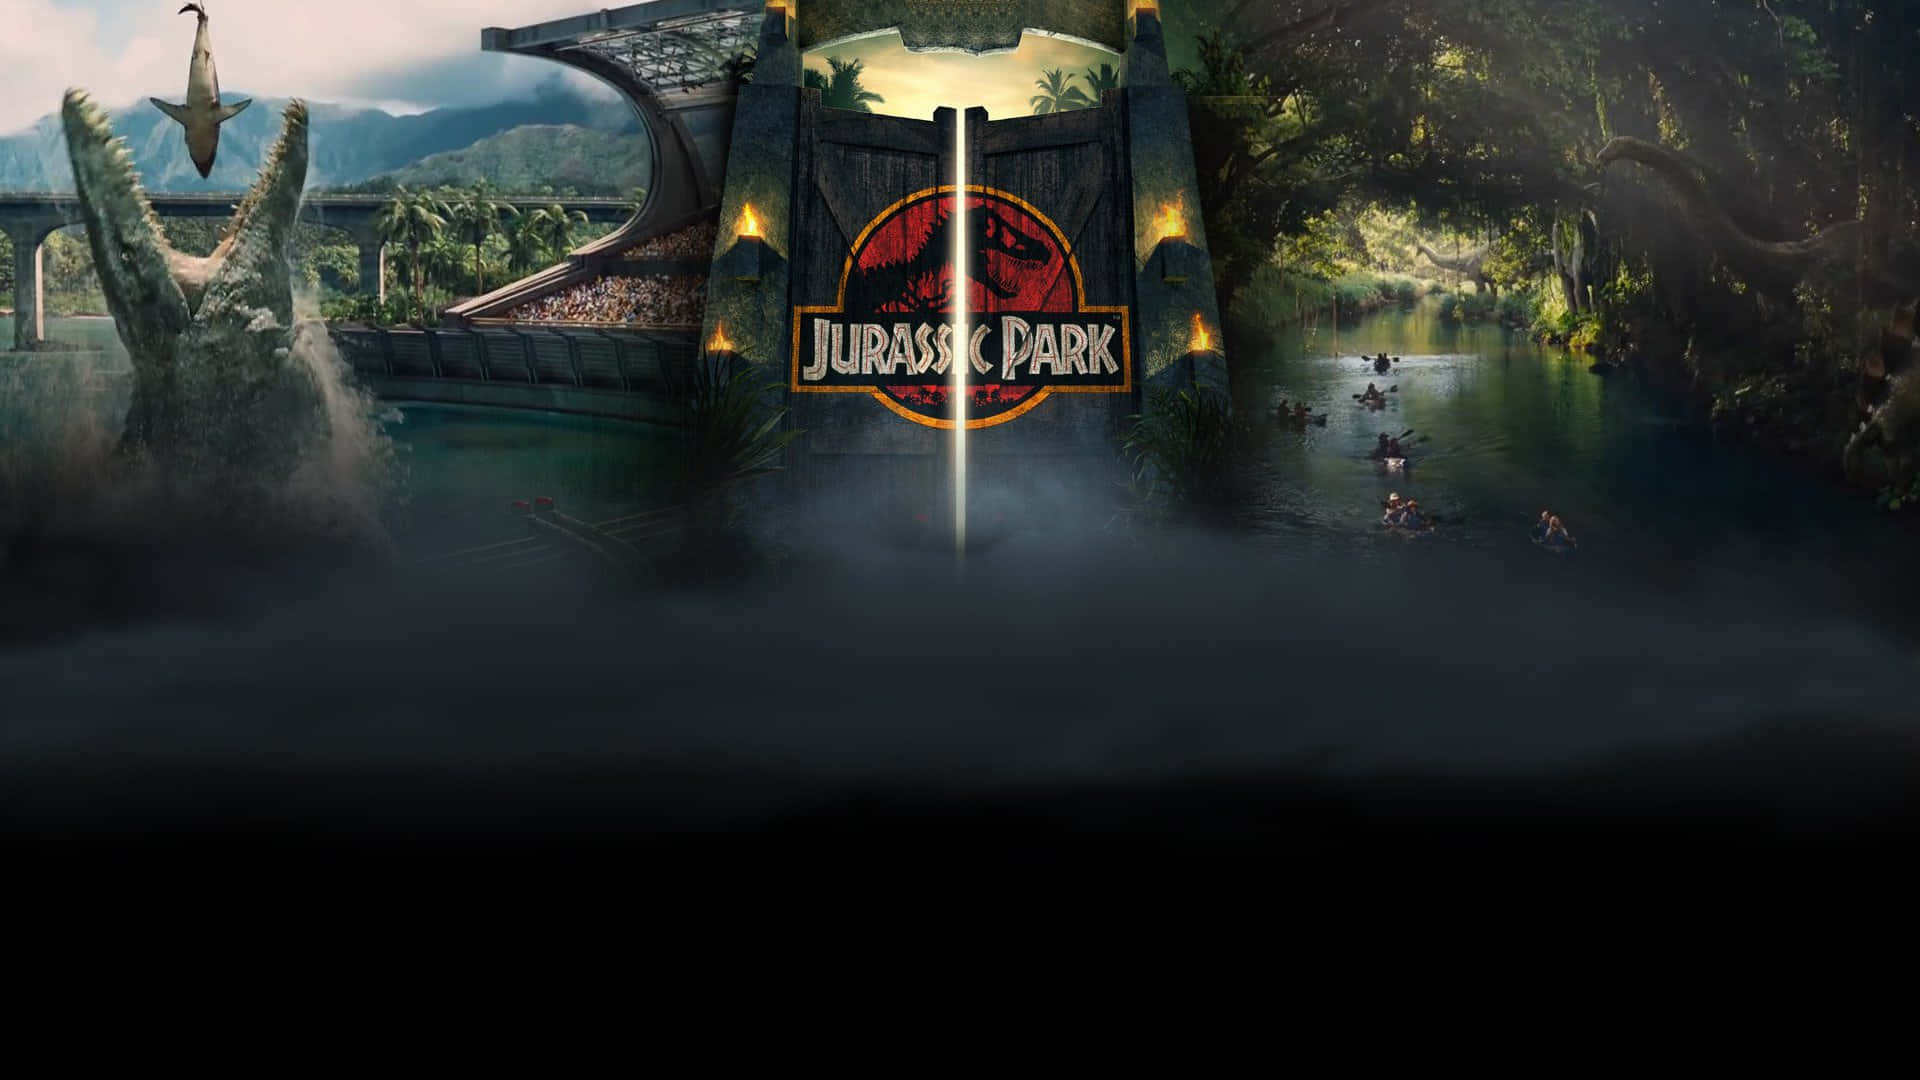 Take a Journey with the Dinosaur on Jurassic Park Zoom